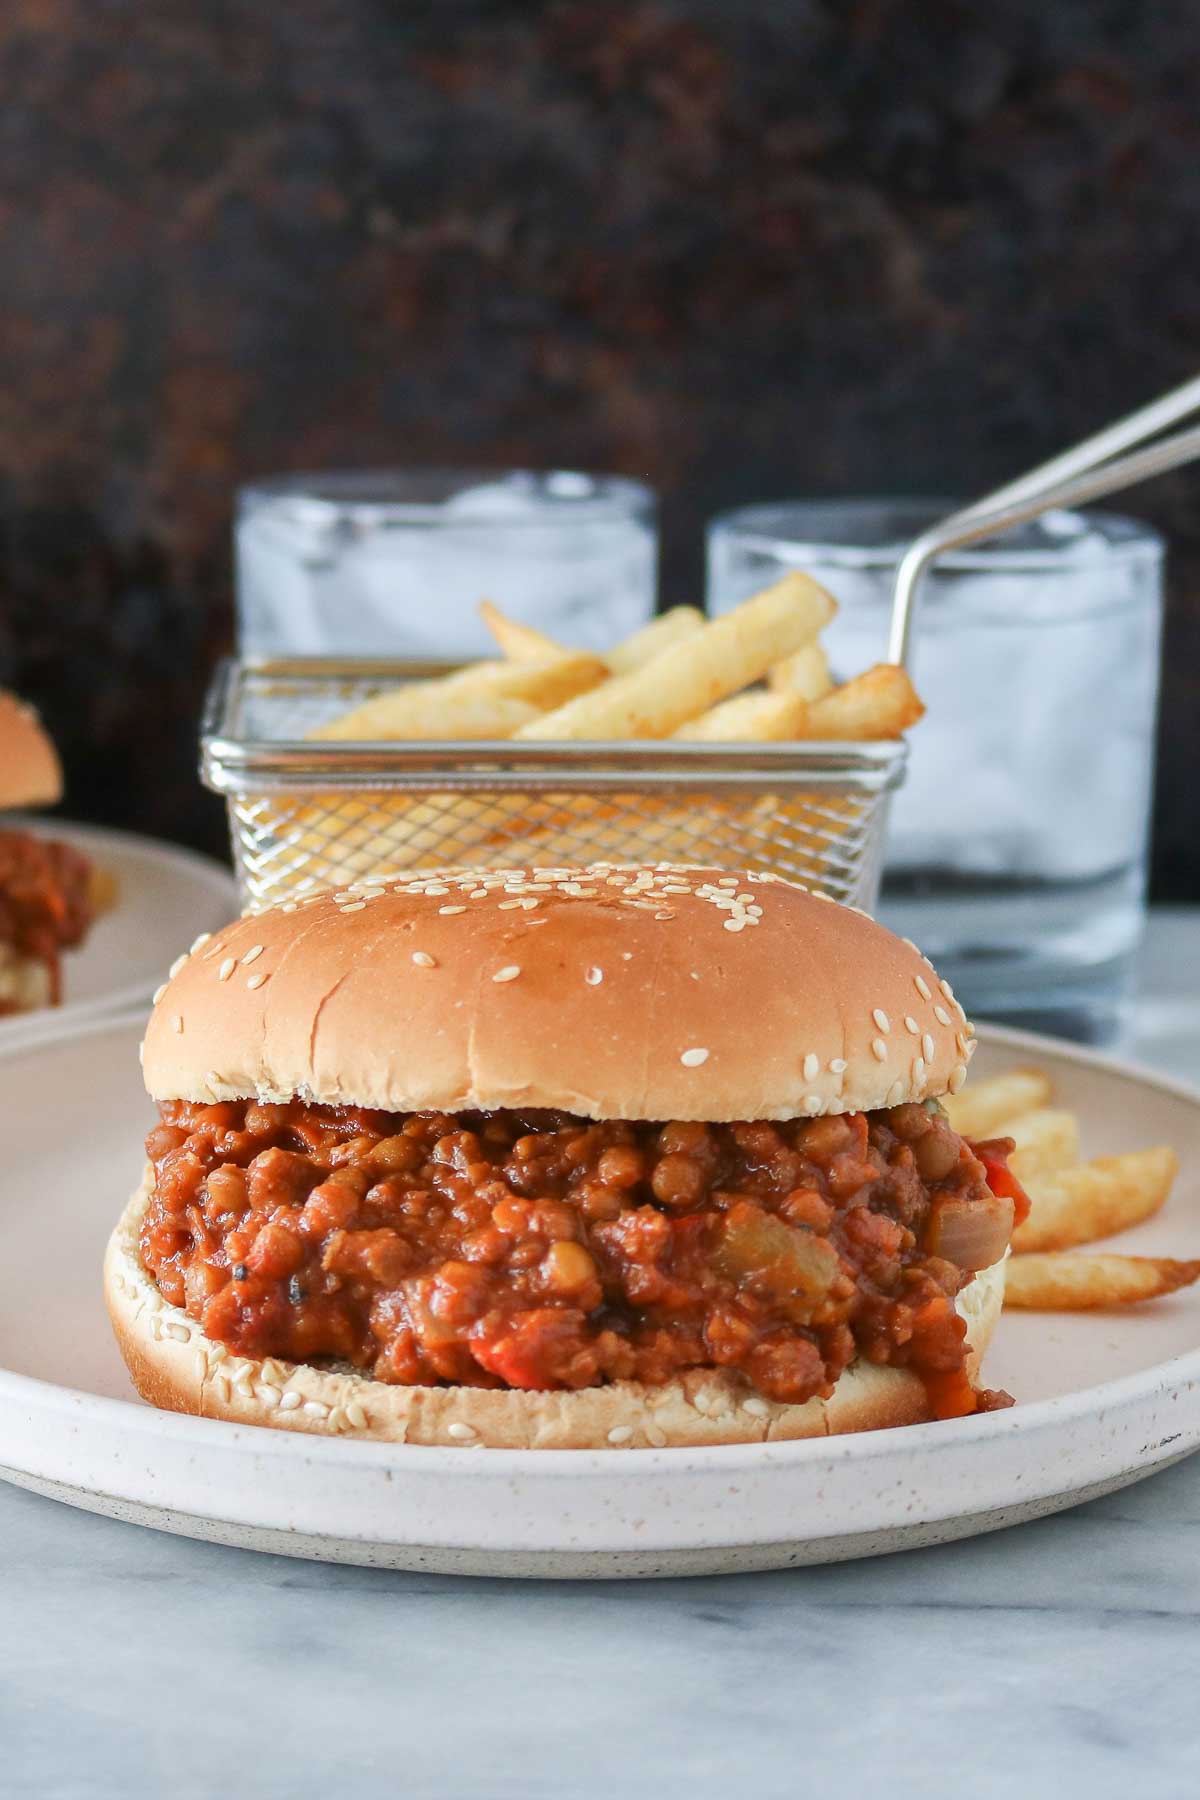 Vegan sloppy joe and basket of fries on a plate in front of two glasses of water.